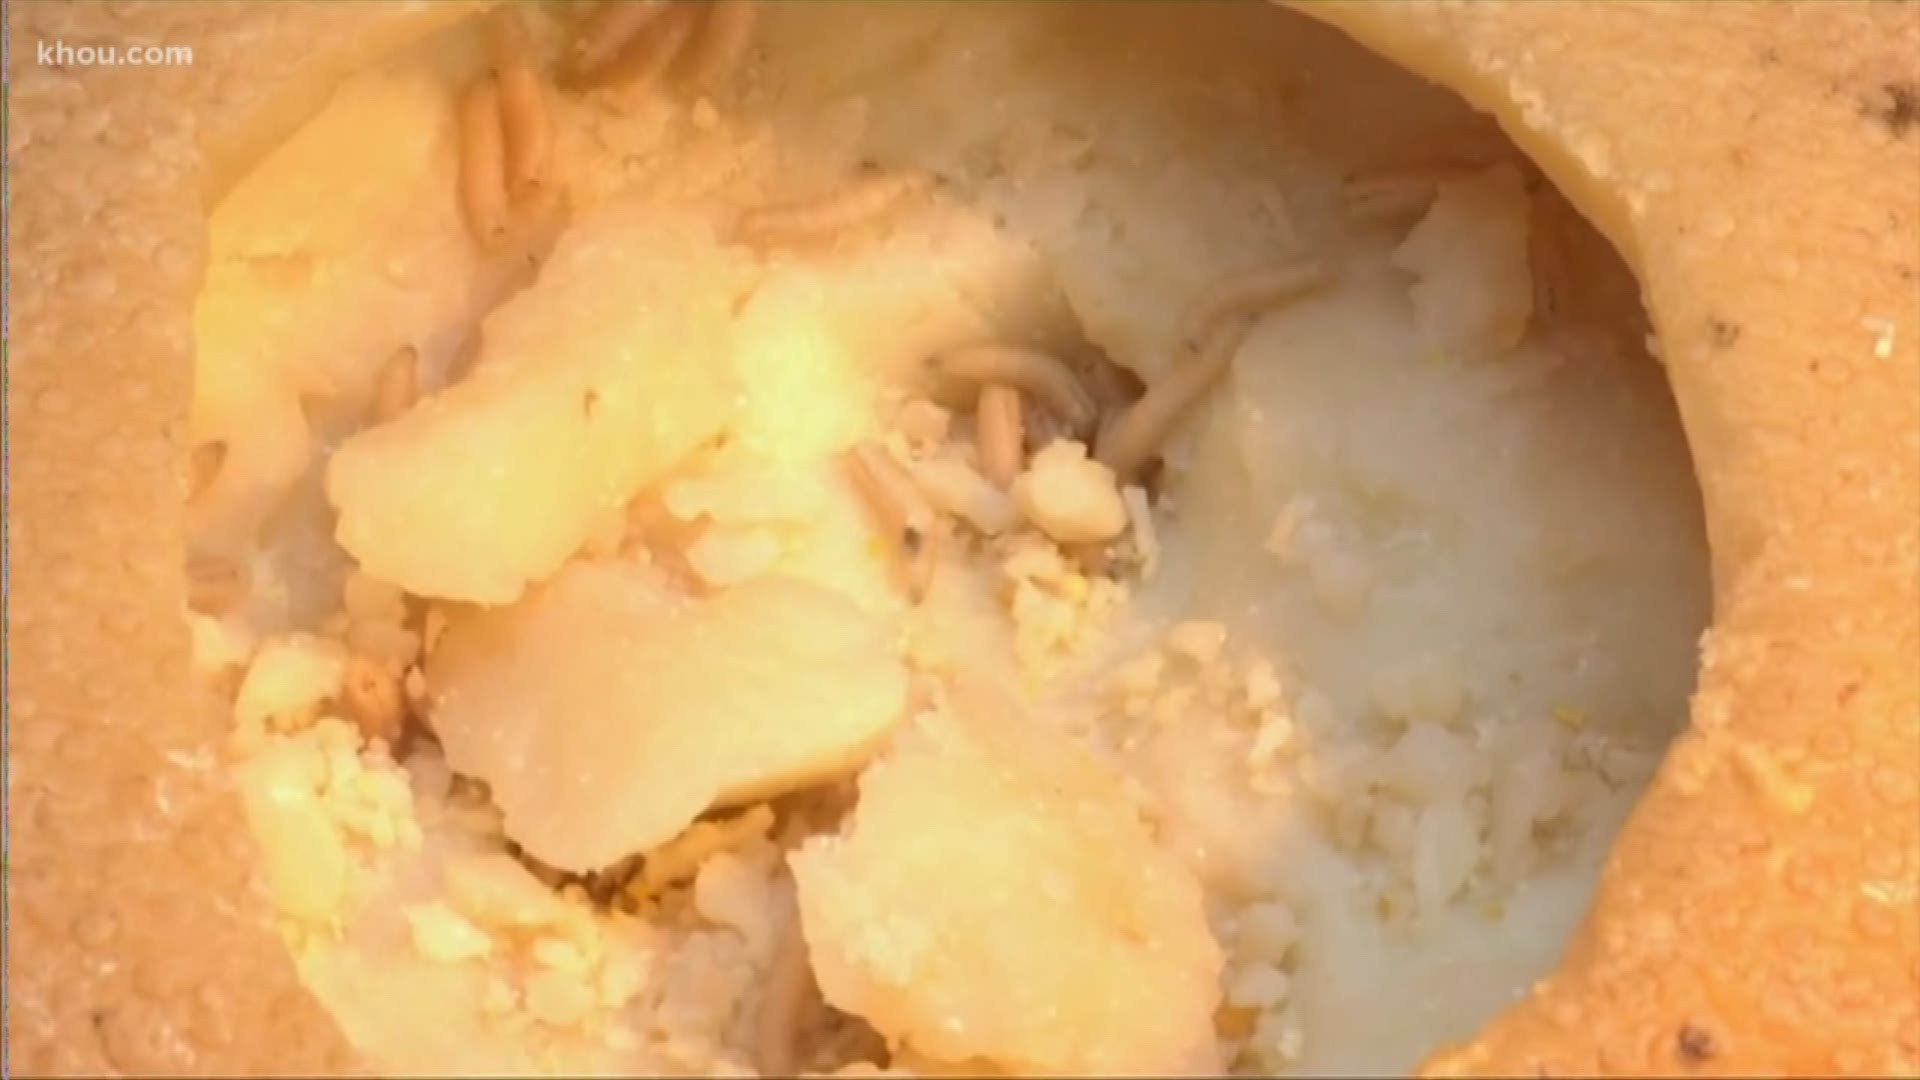 Sheep eyeball juice, maggots and a metal spoon are all on the menu at a museum in Sweden. Visitors are encouraged to taste the disgusting stuff. KHOU 11 News anchor Ron Trevino is dishing out this weird news.